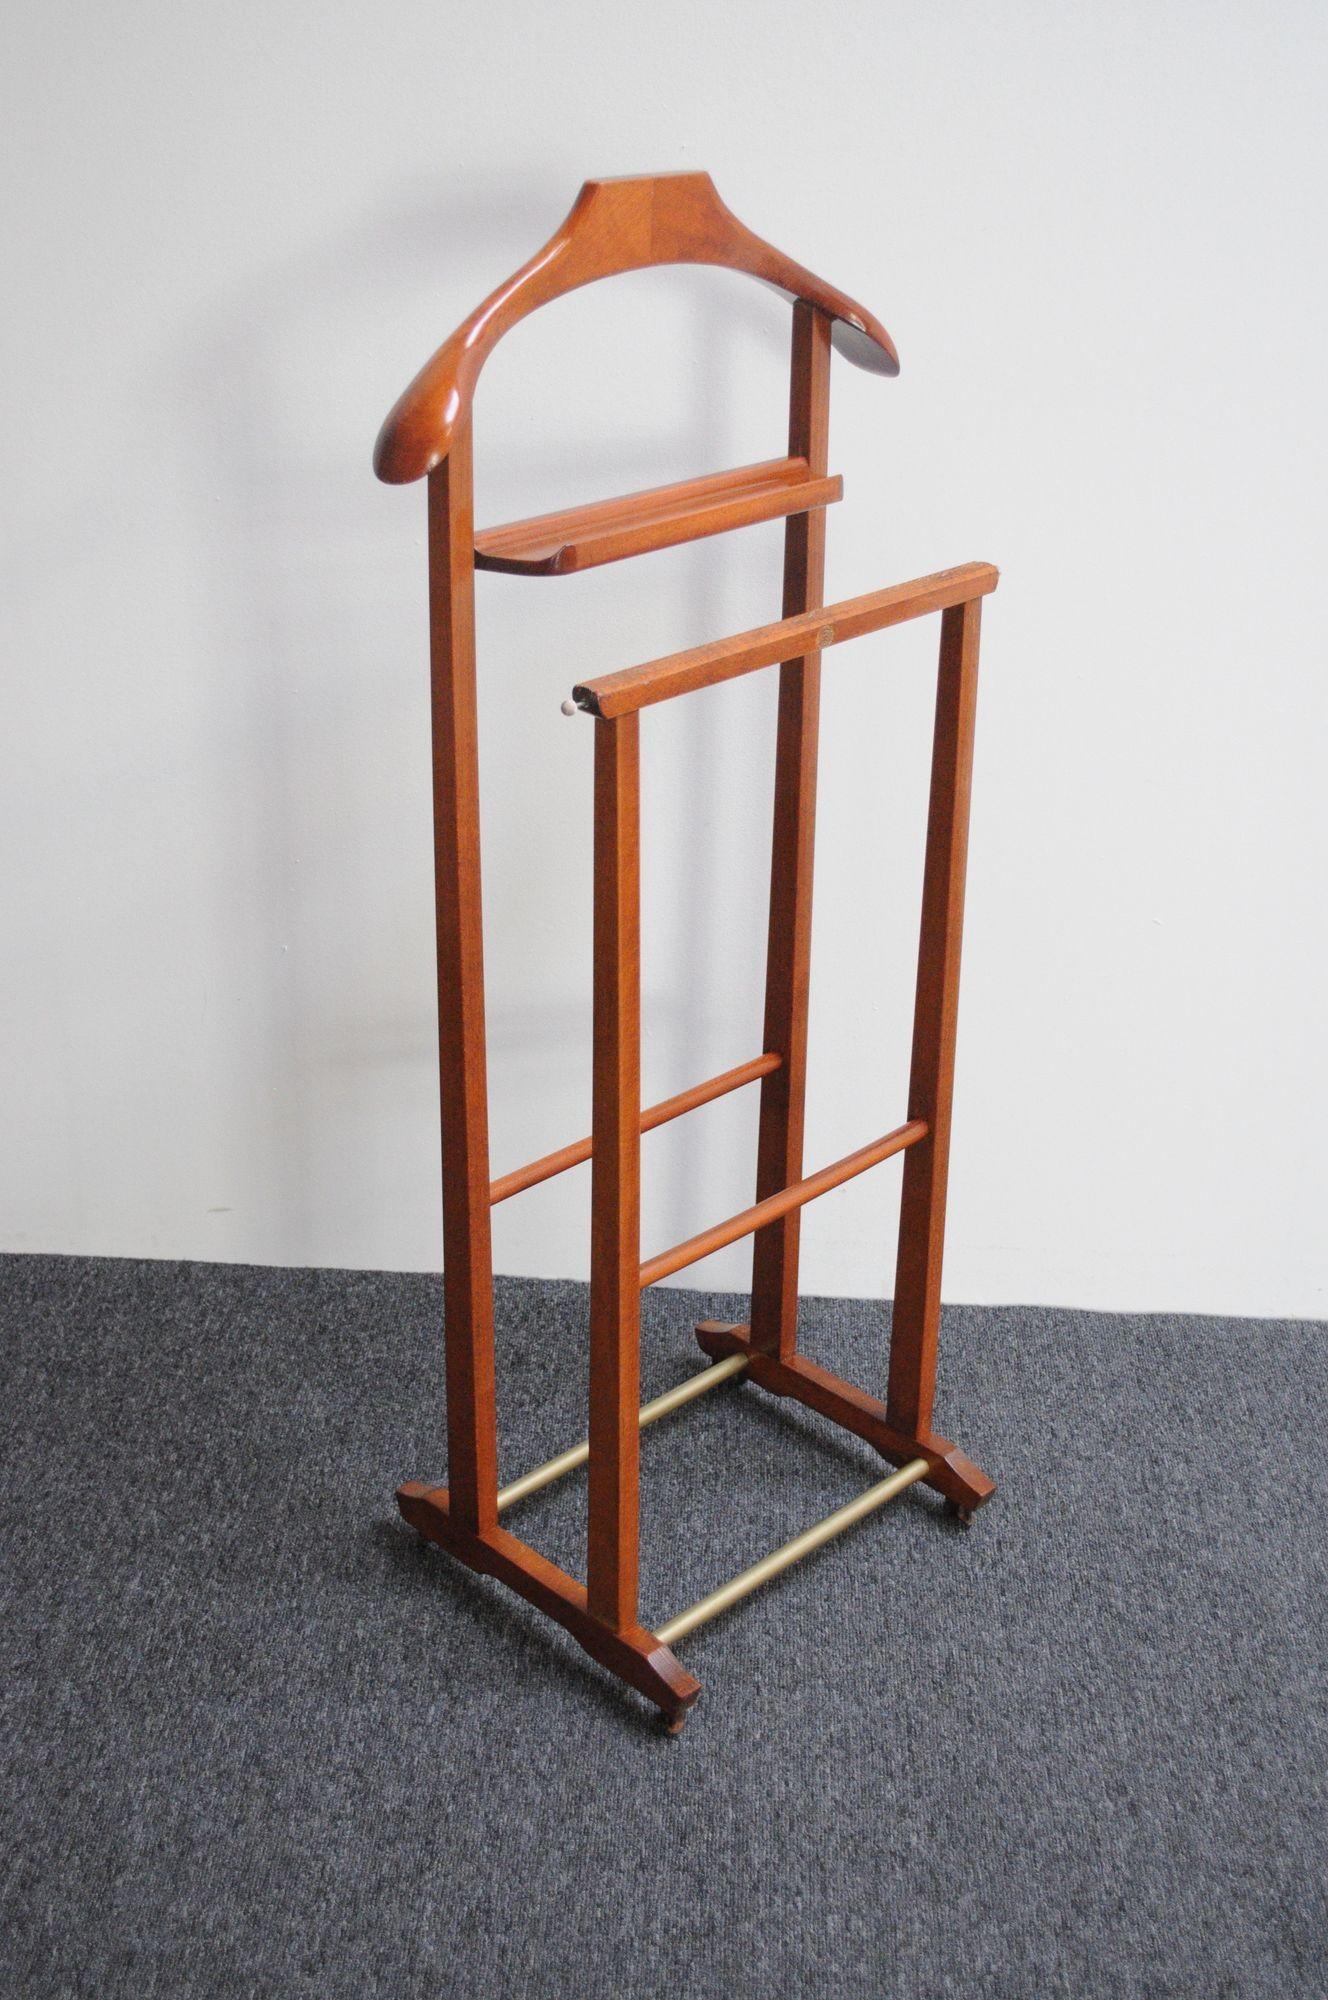 This Italian valet was designed by Fratelli Reguitti in the 1950s. Unique example with two-segment construction composed of a frame/hanger and change or cufflink holder with a separate front section with bar intended for hanging scarves, ties, or